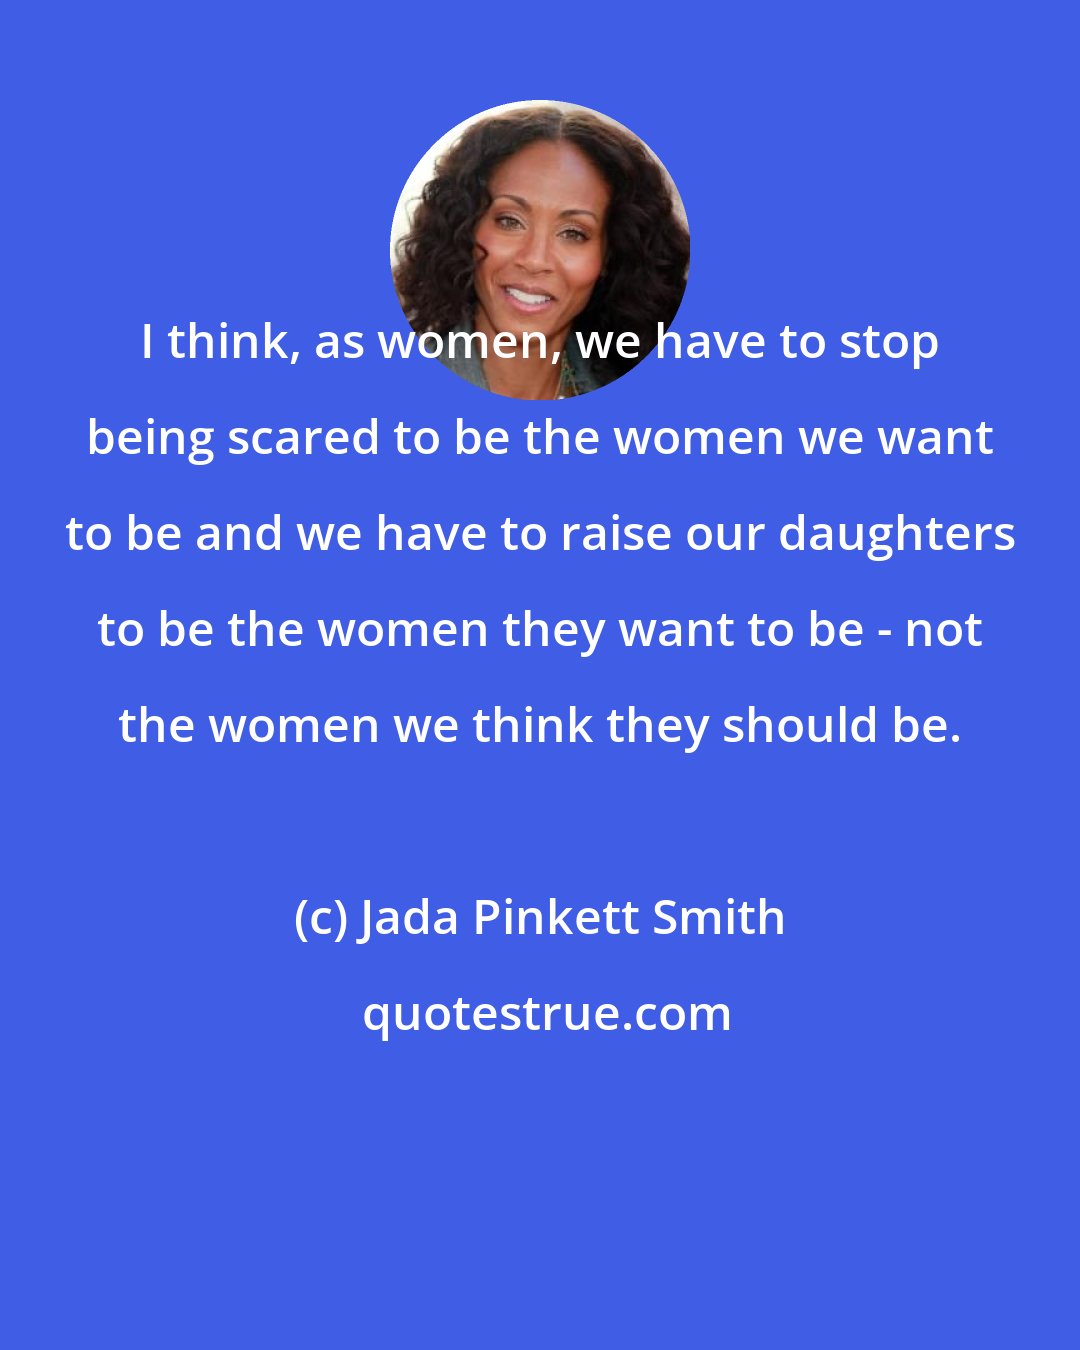 Jada Pinkett Smith: I think, as women, we have to stop being scared to be the women we want to be and we have to raise our daughters to be the women they want to be - not the women we think they should be.